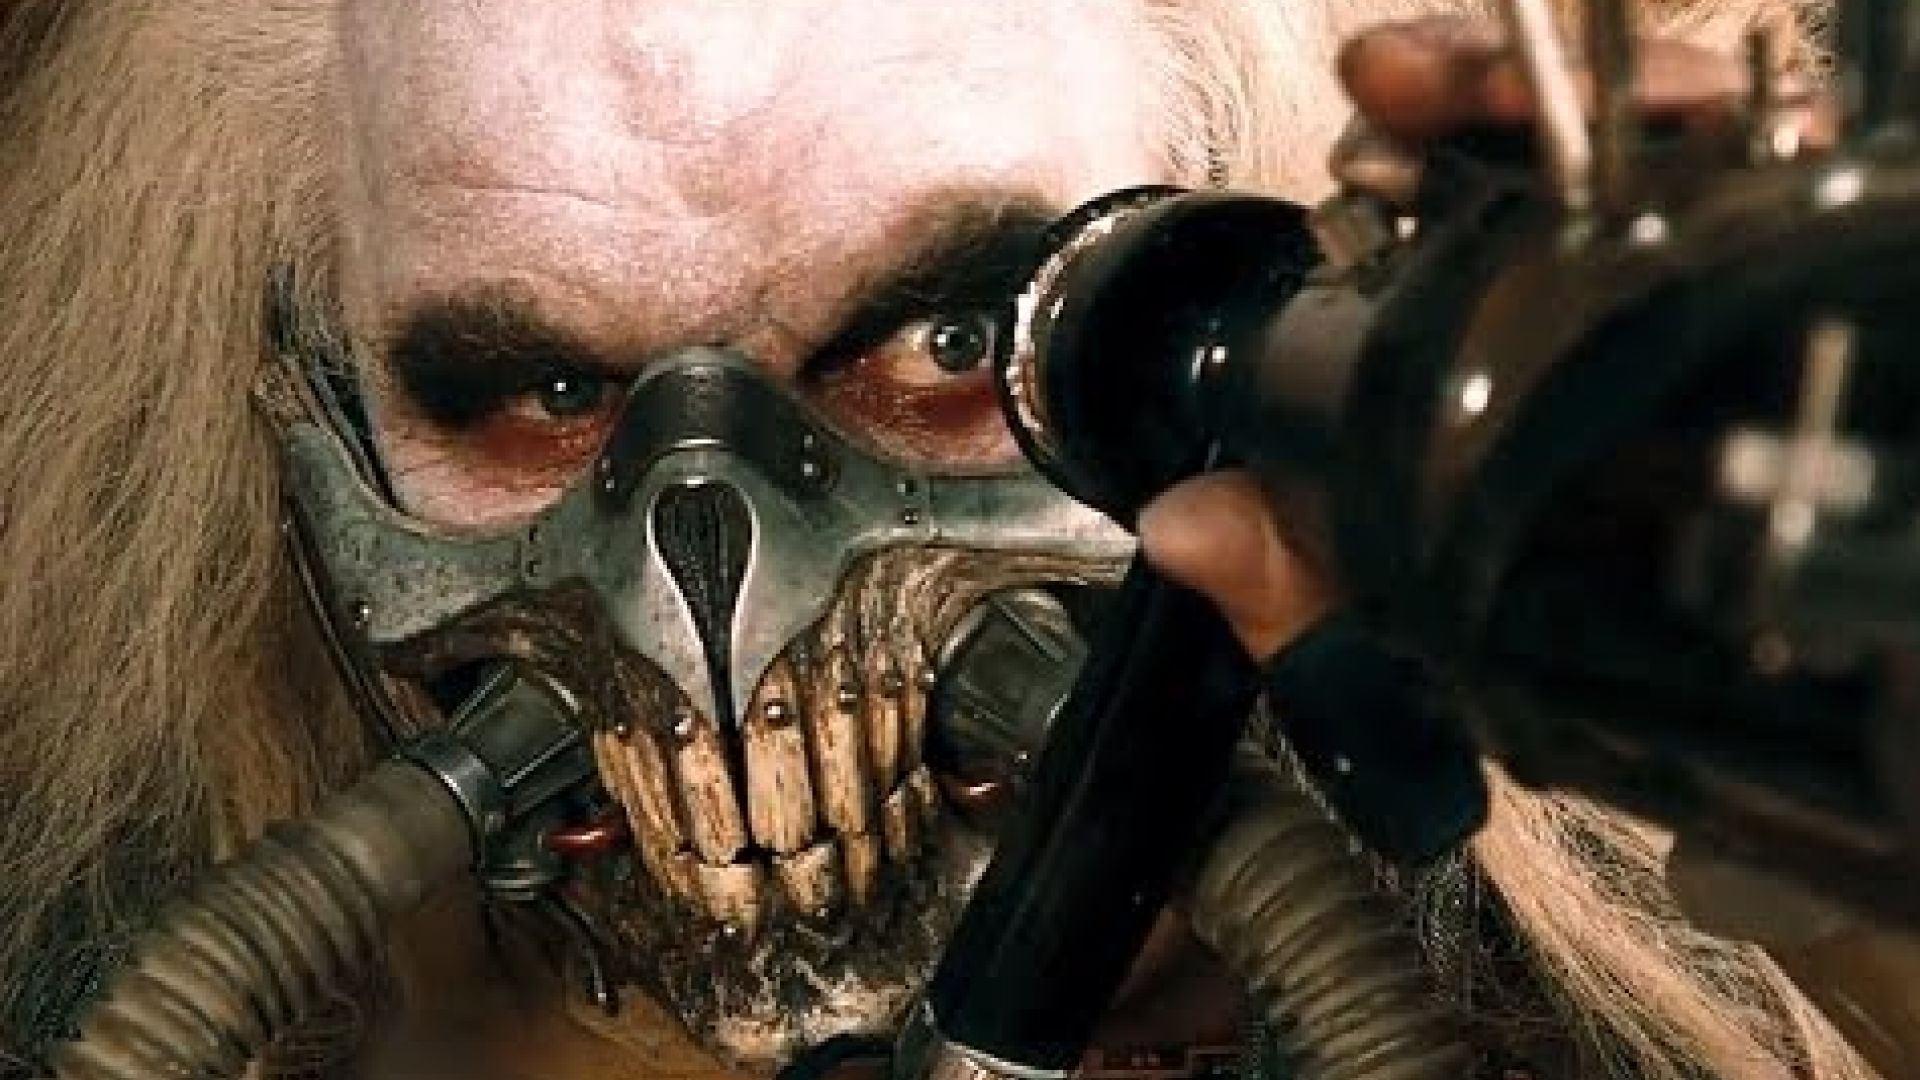 Third Official Trailer for 'Mad Max: Fury Road'